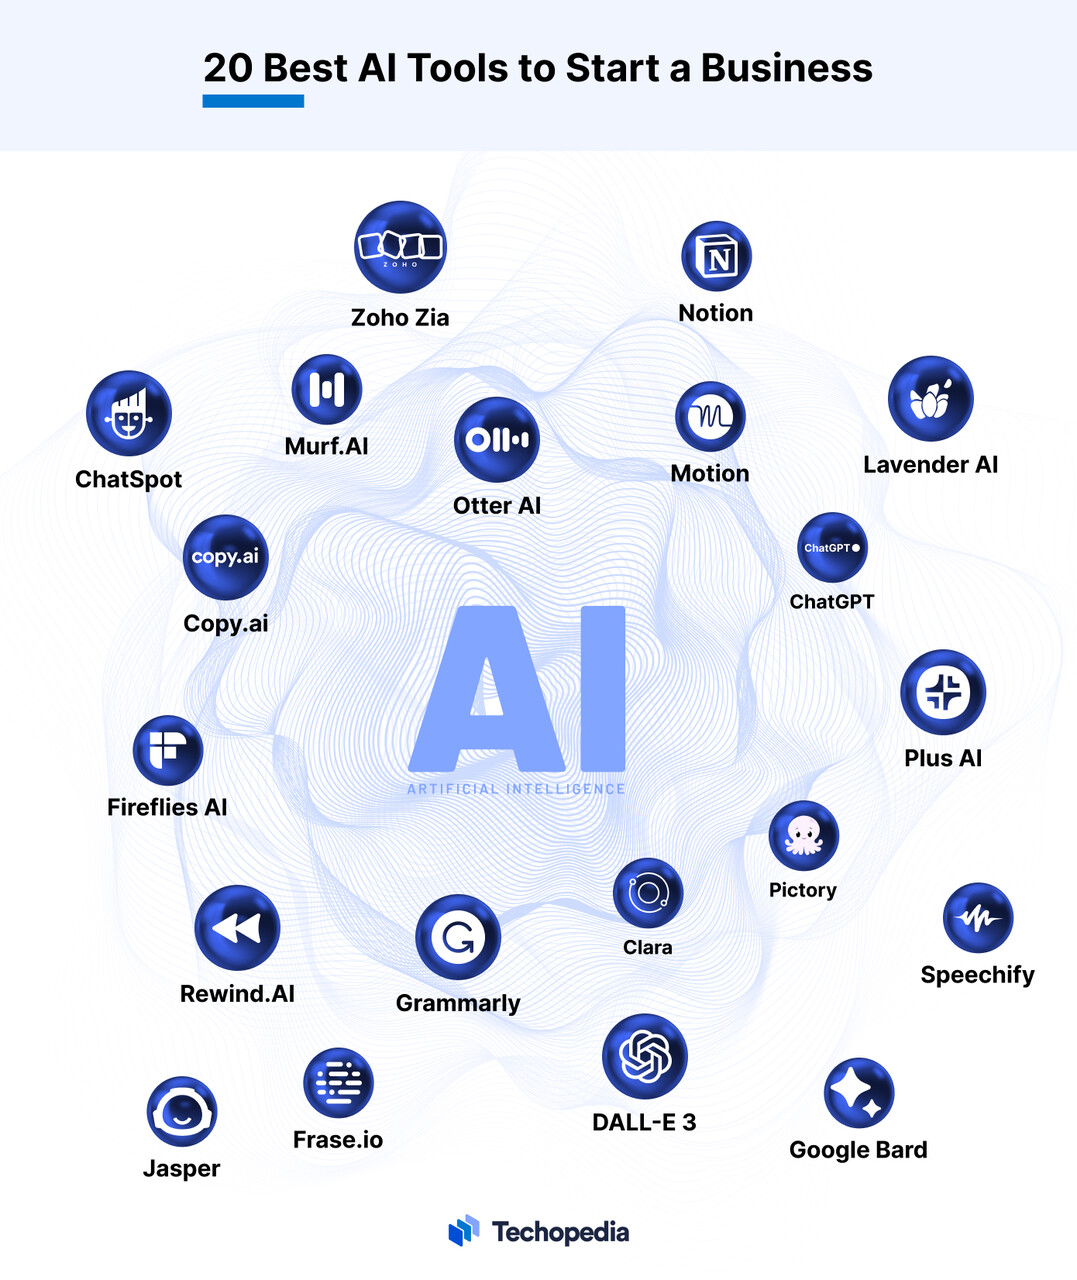 Top 20 AI tools for starting a business